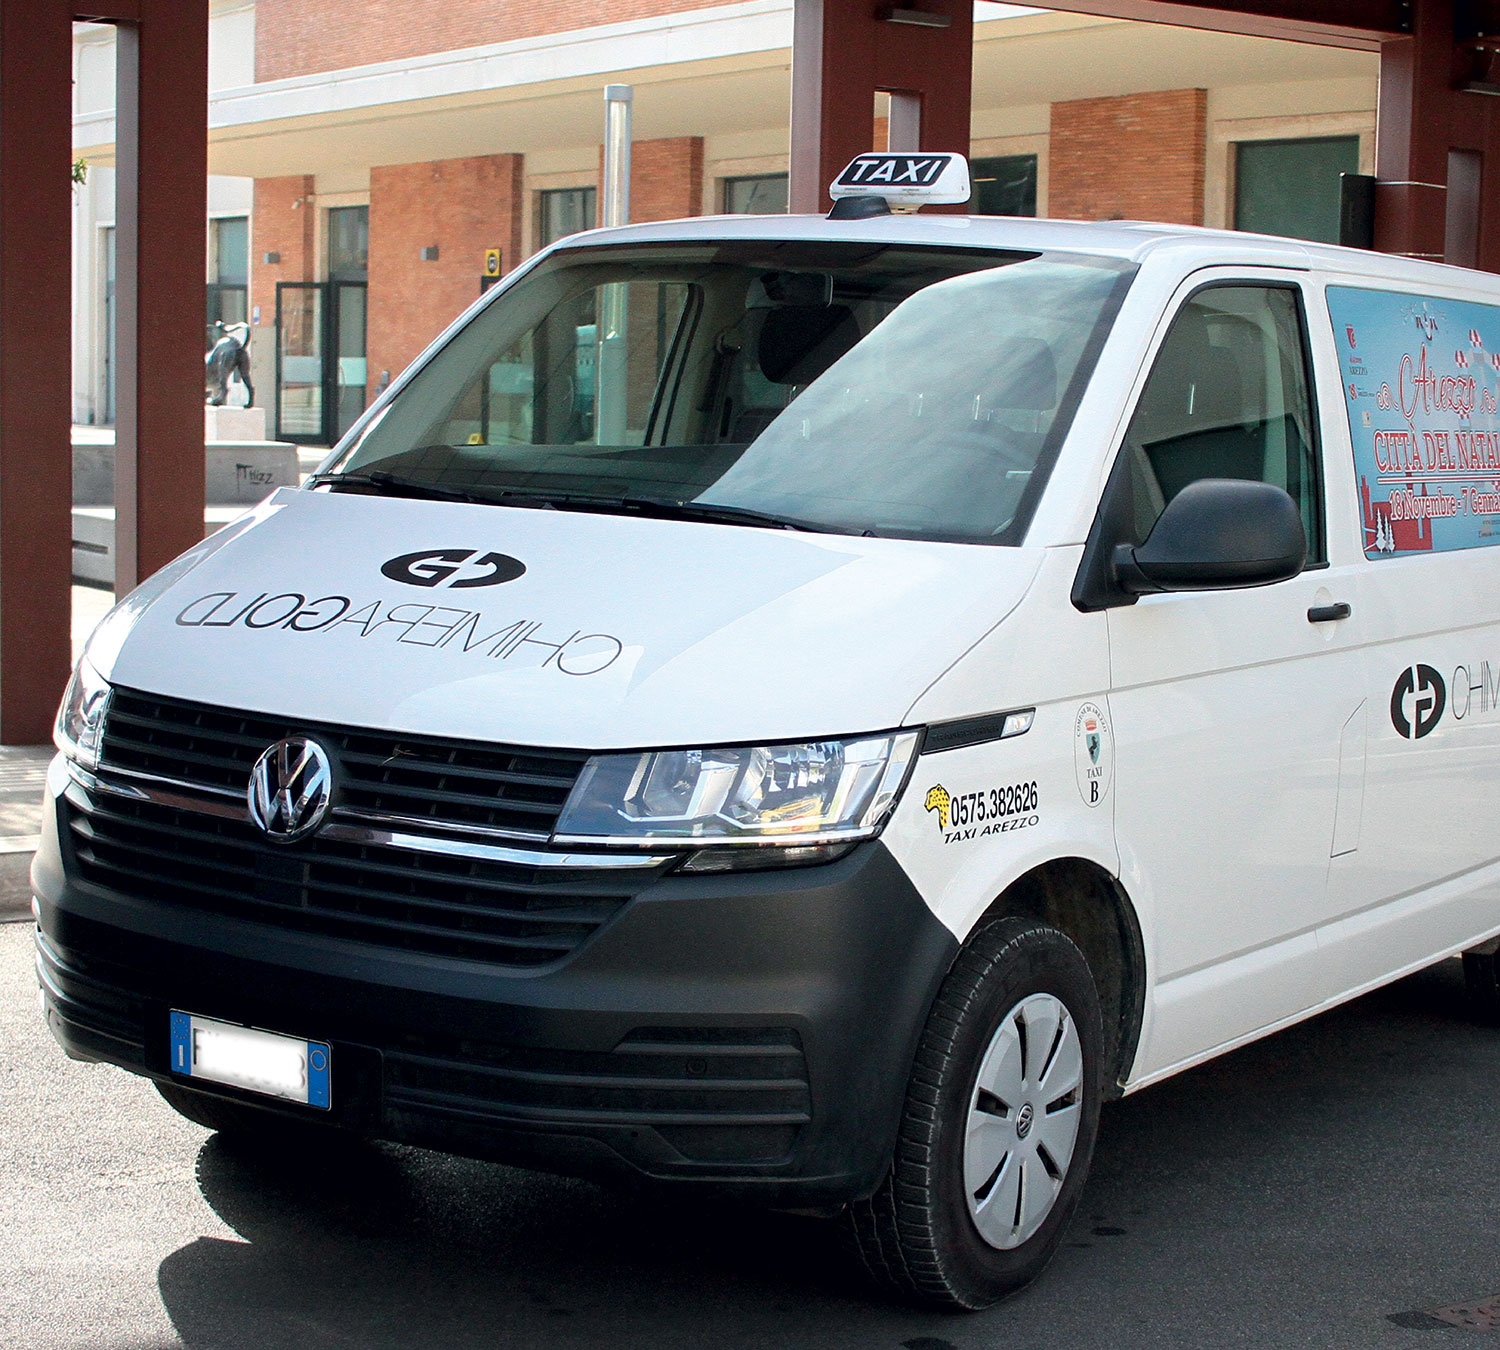 TAXIPULMINO 9-seater minibus with driver, Airport transfers, train stations, locations, and tourist tours.